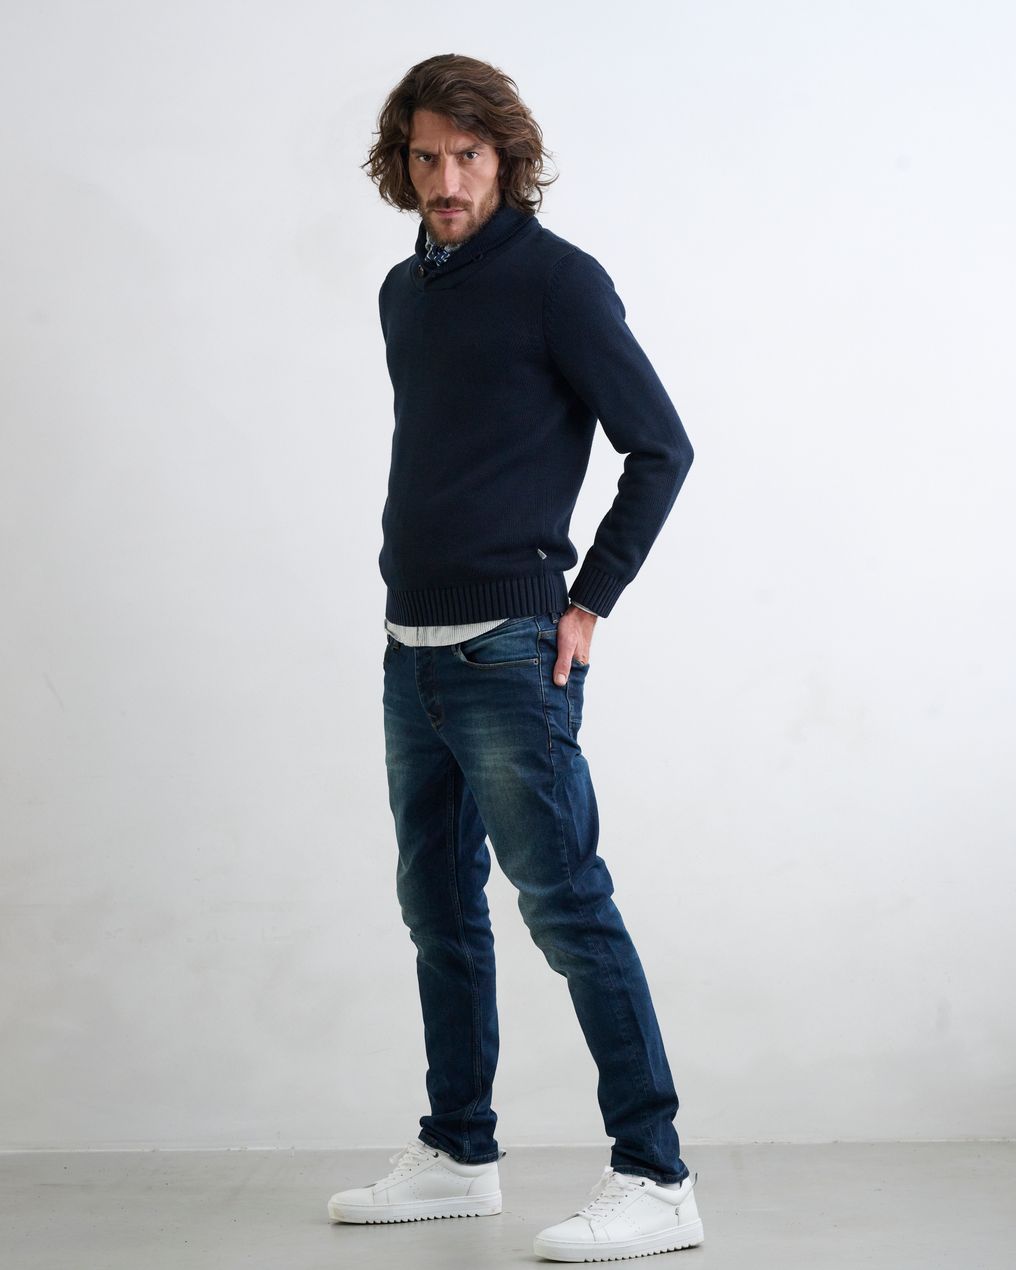 J.C. Rags Joah Heavy Washed Jeans